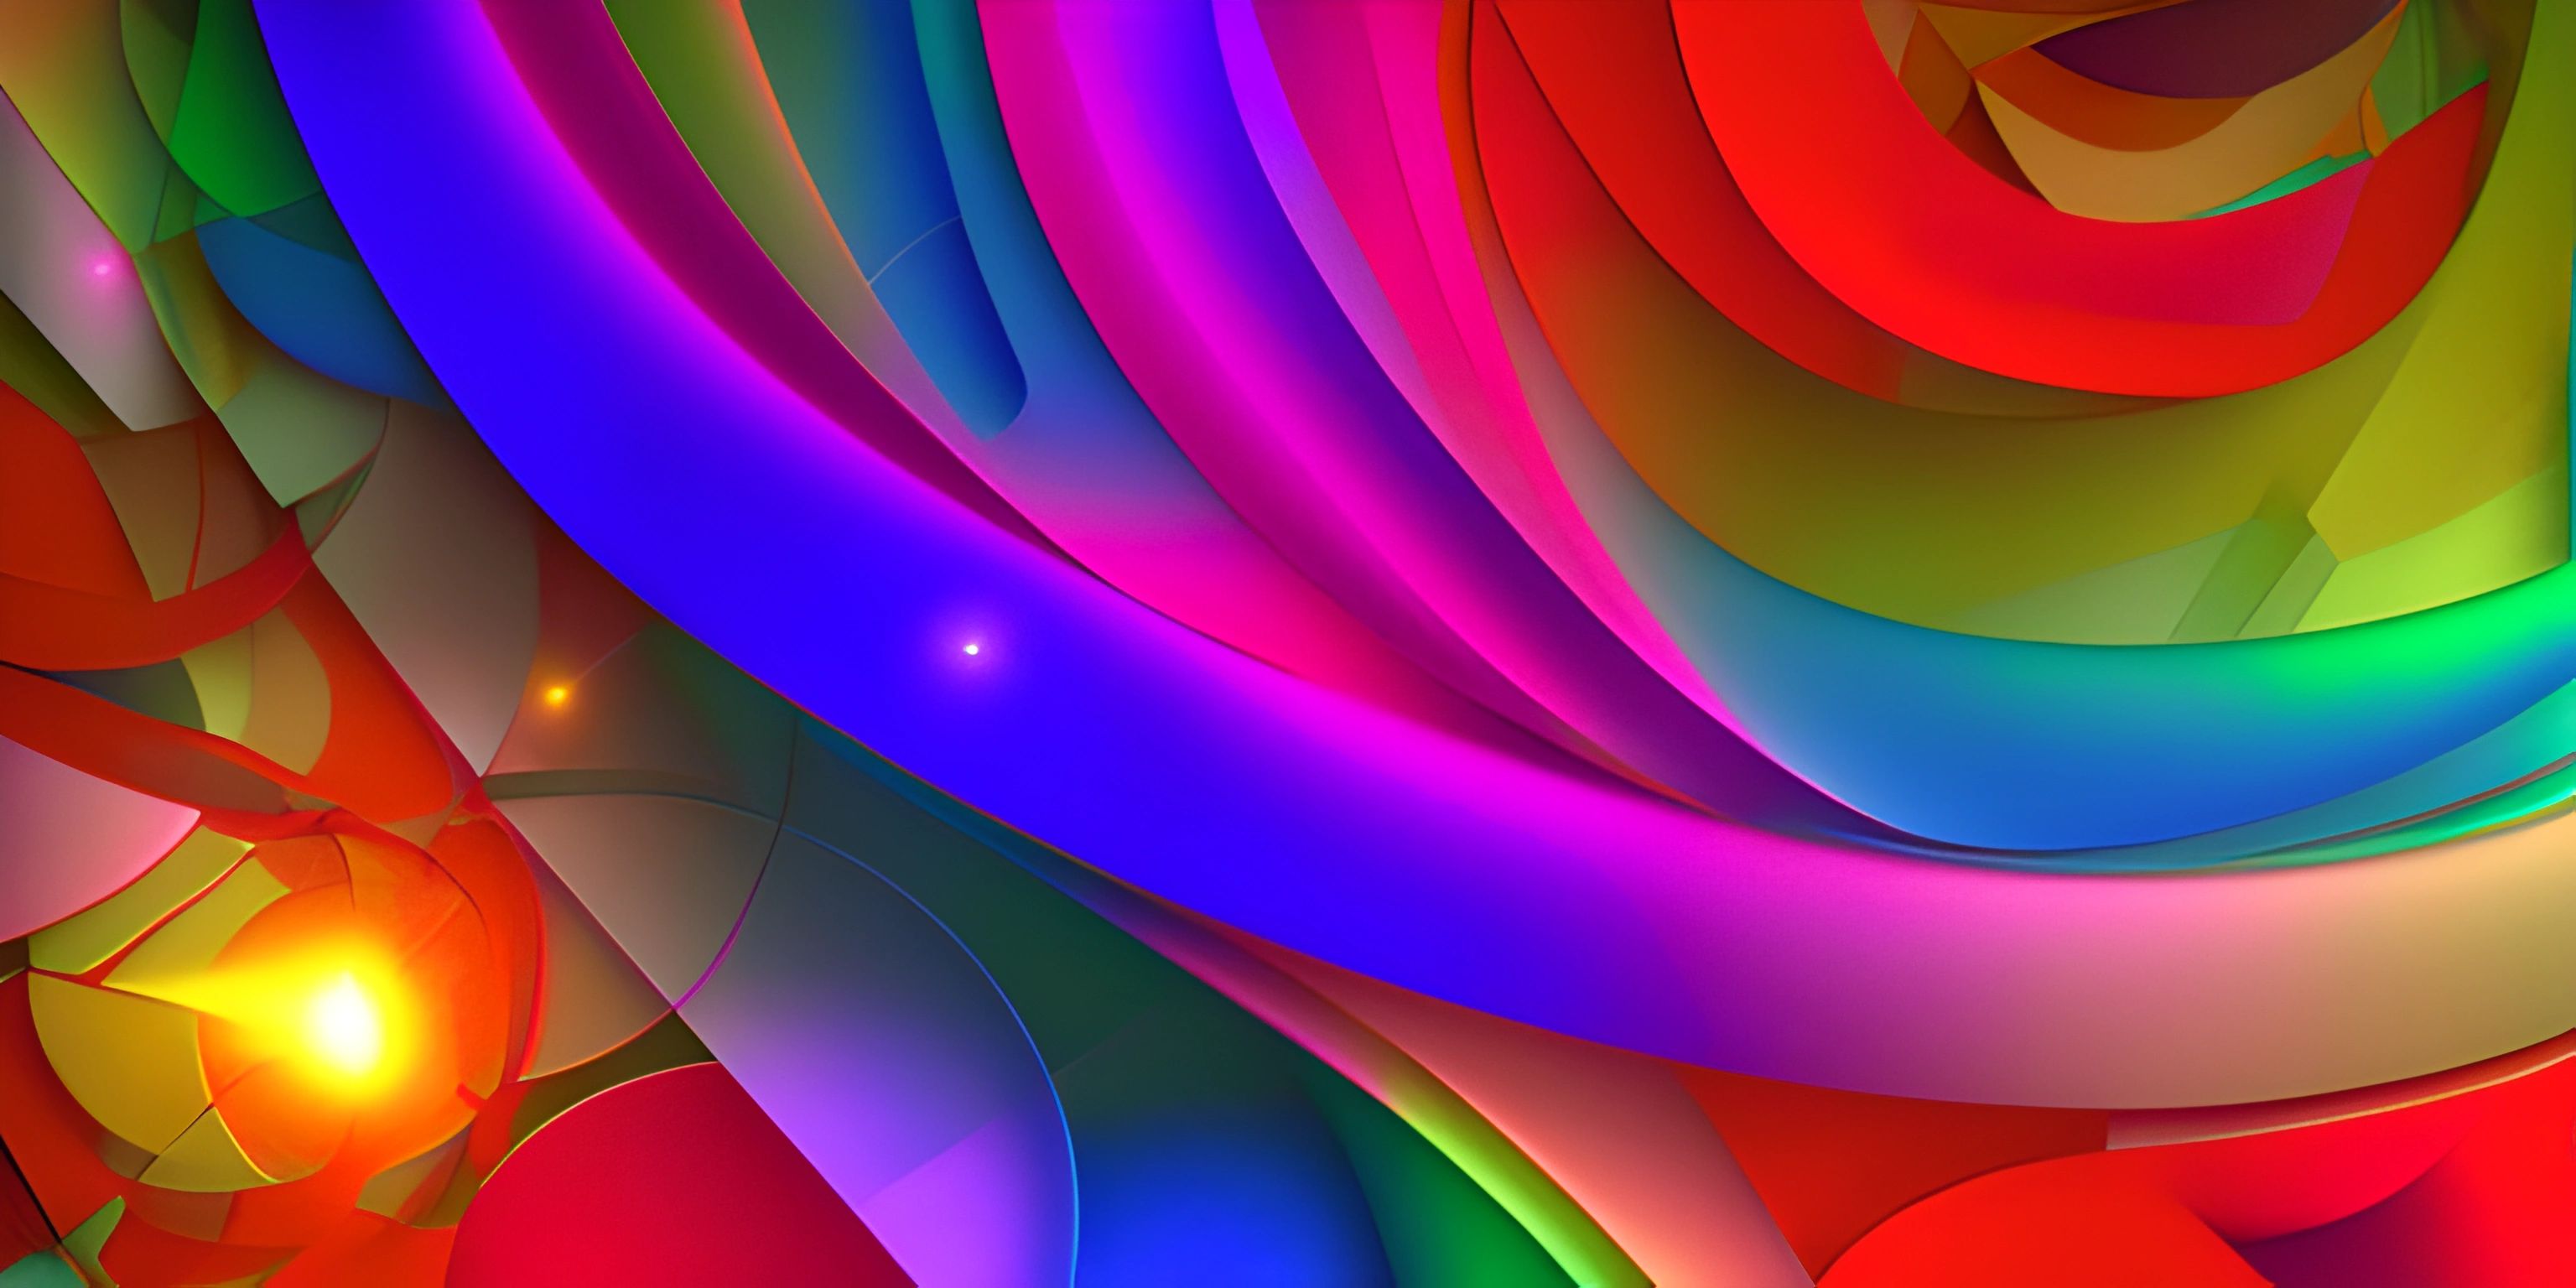 a colorful background made up of different shapes and colors of a spiral shape with many bright spots